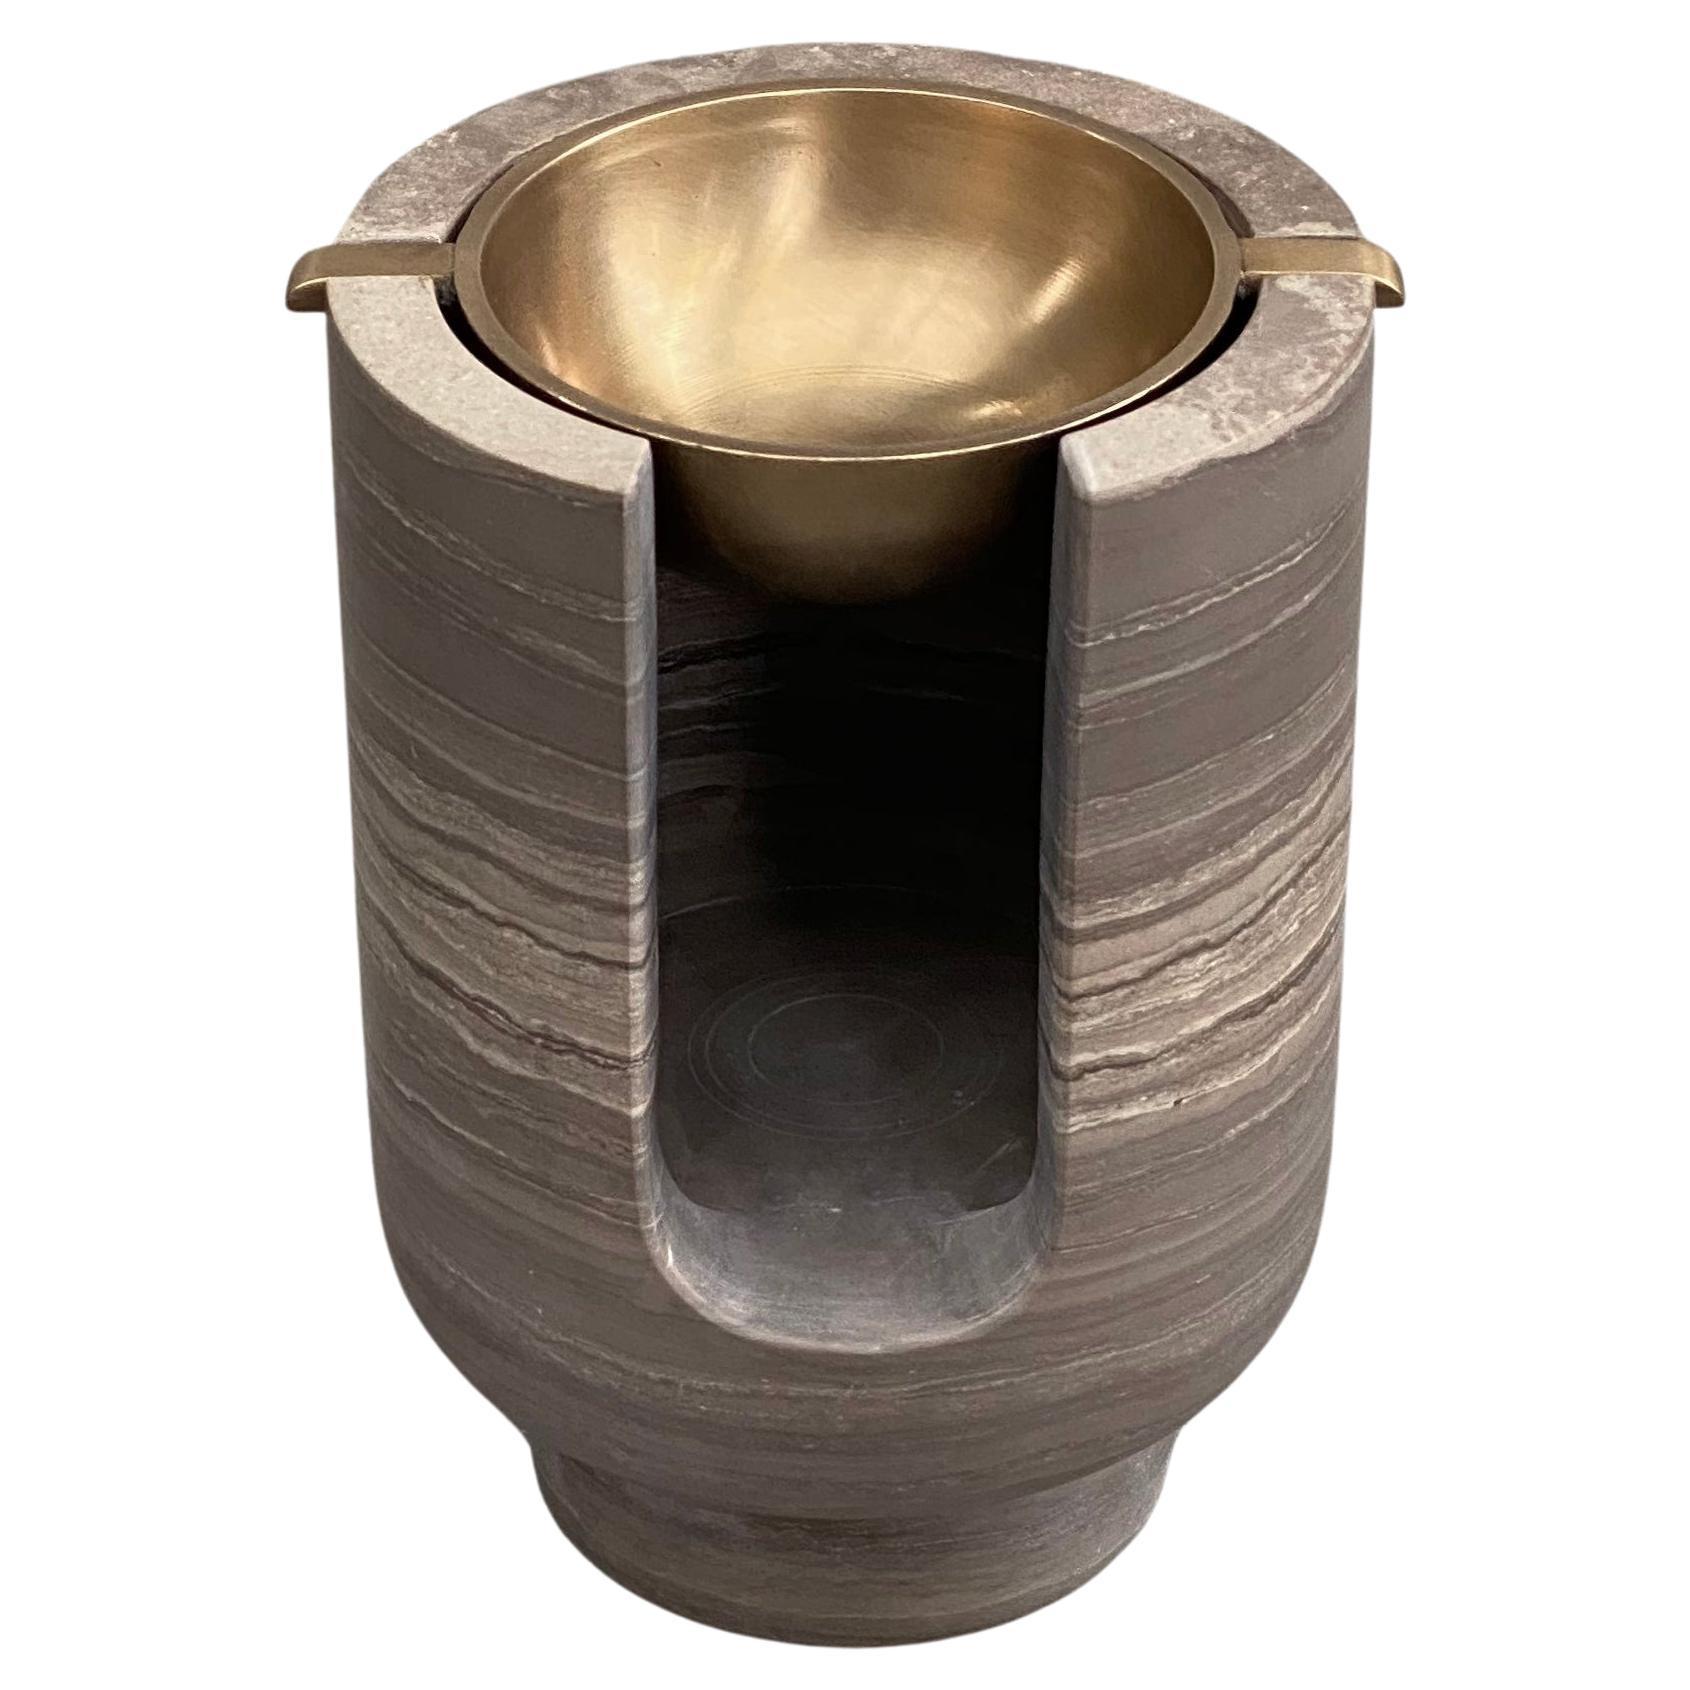 AURA Oil Burner in Smoke Grey with BB Bowl For Sale